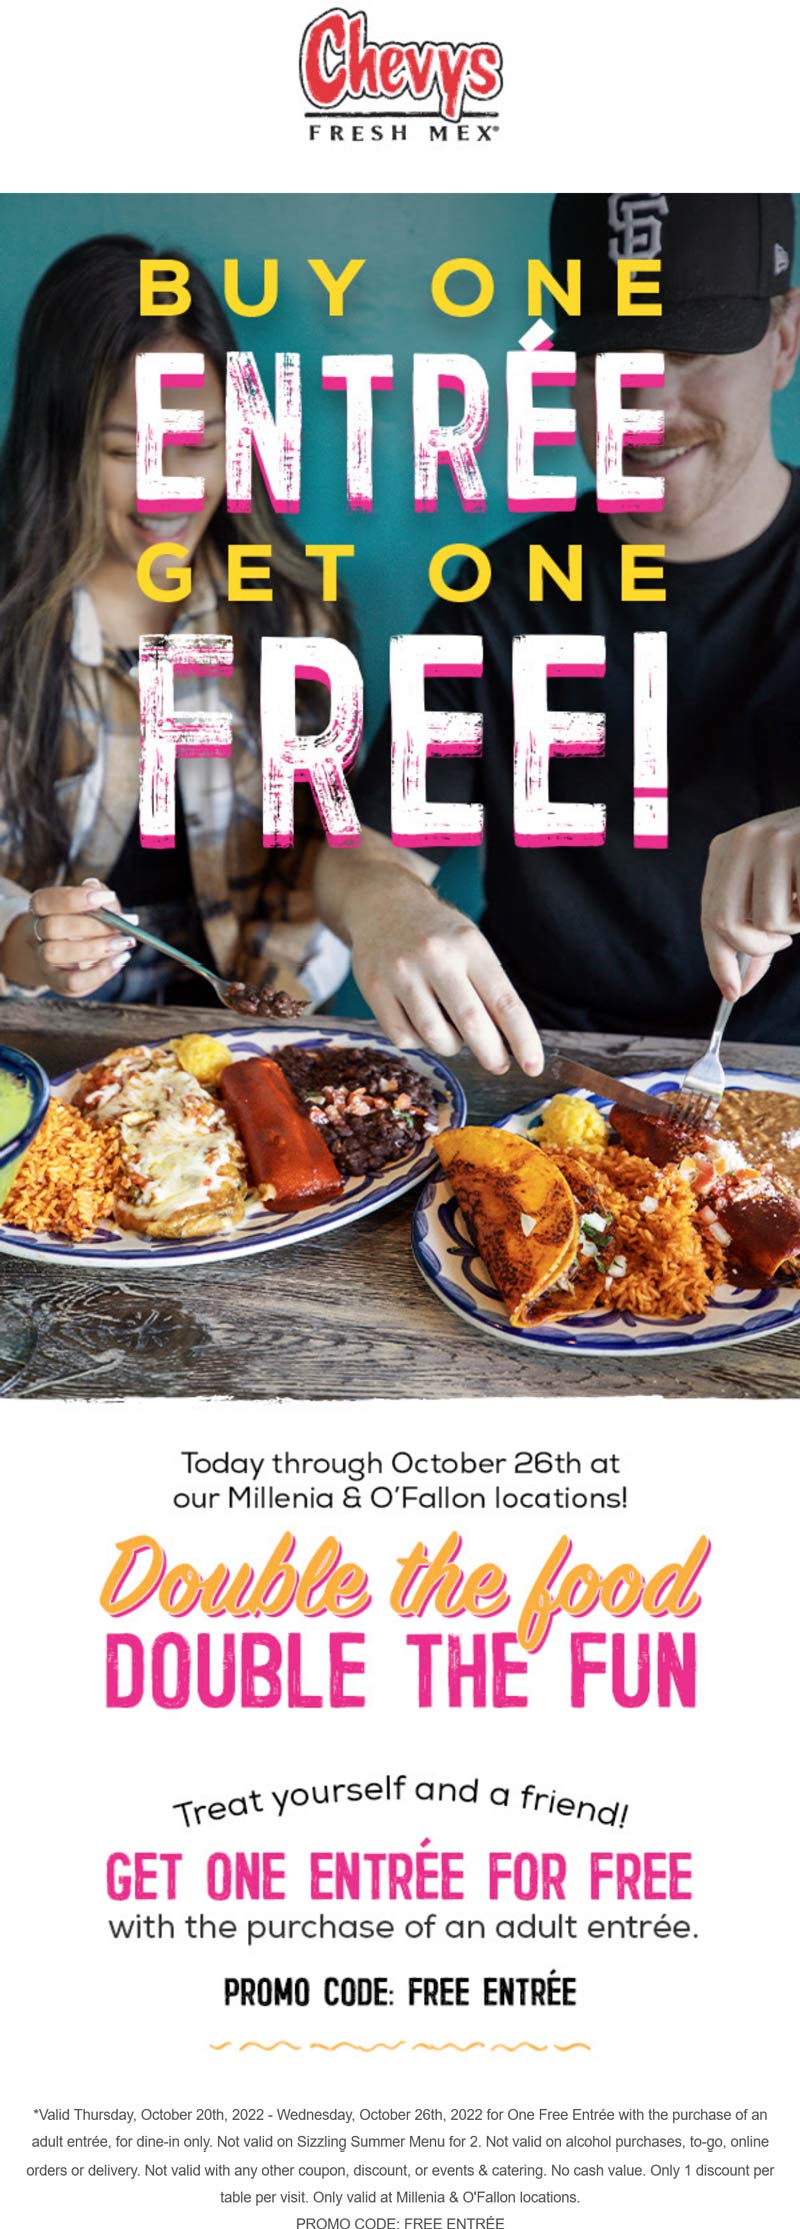 Chevys restaurants Coupon  Second entree free at various Chevys Fresh Mex locations via promo code FREE ENTRÉE #chevys 